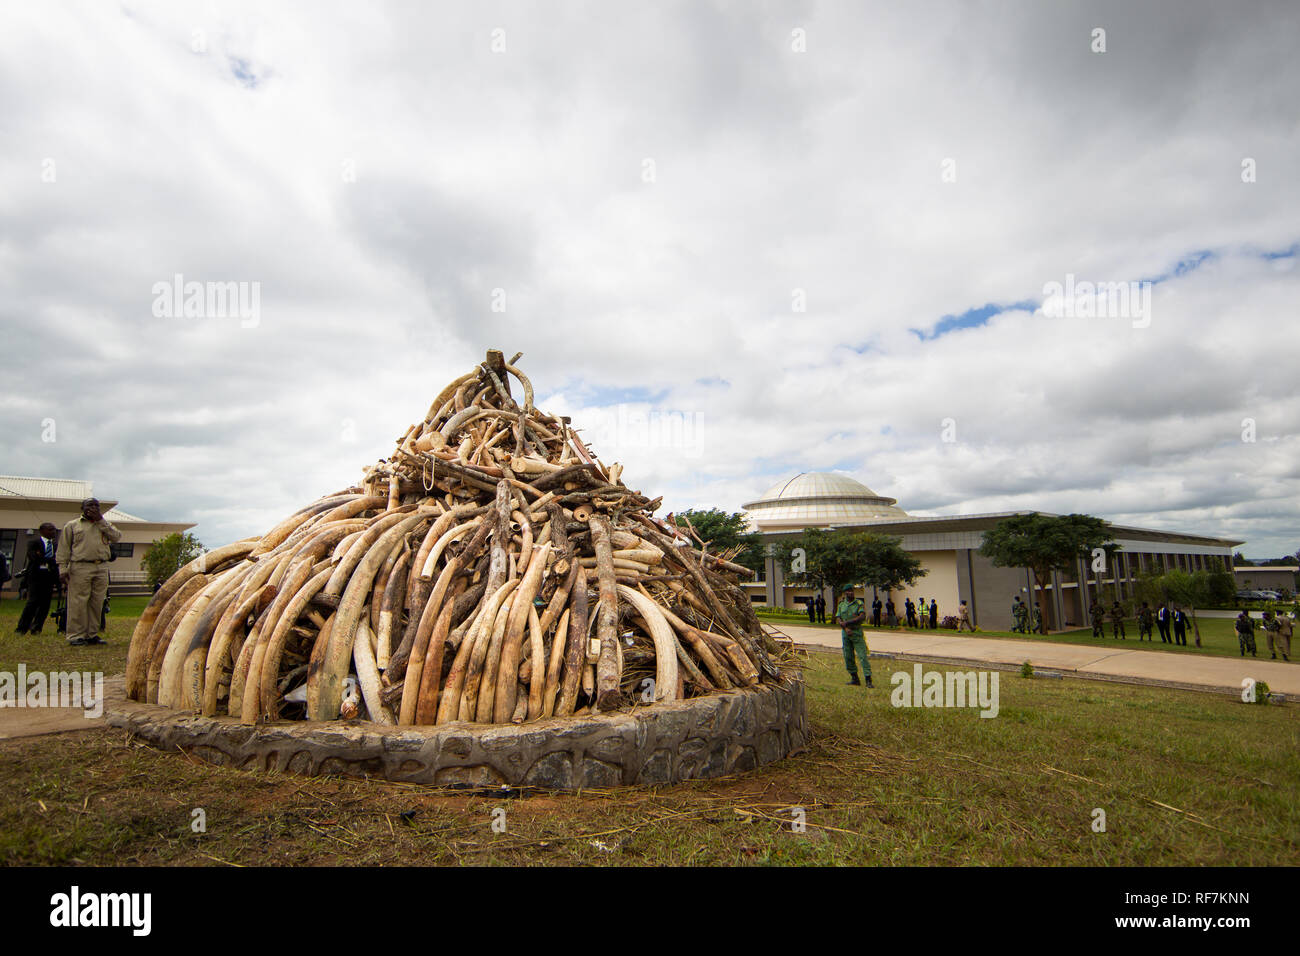 Confiscated elephant ivory is stacked in a pile to be burned in a ceremony against wildlife crime outside parliament in Lilongwe, Malawi Stock Photo